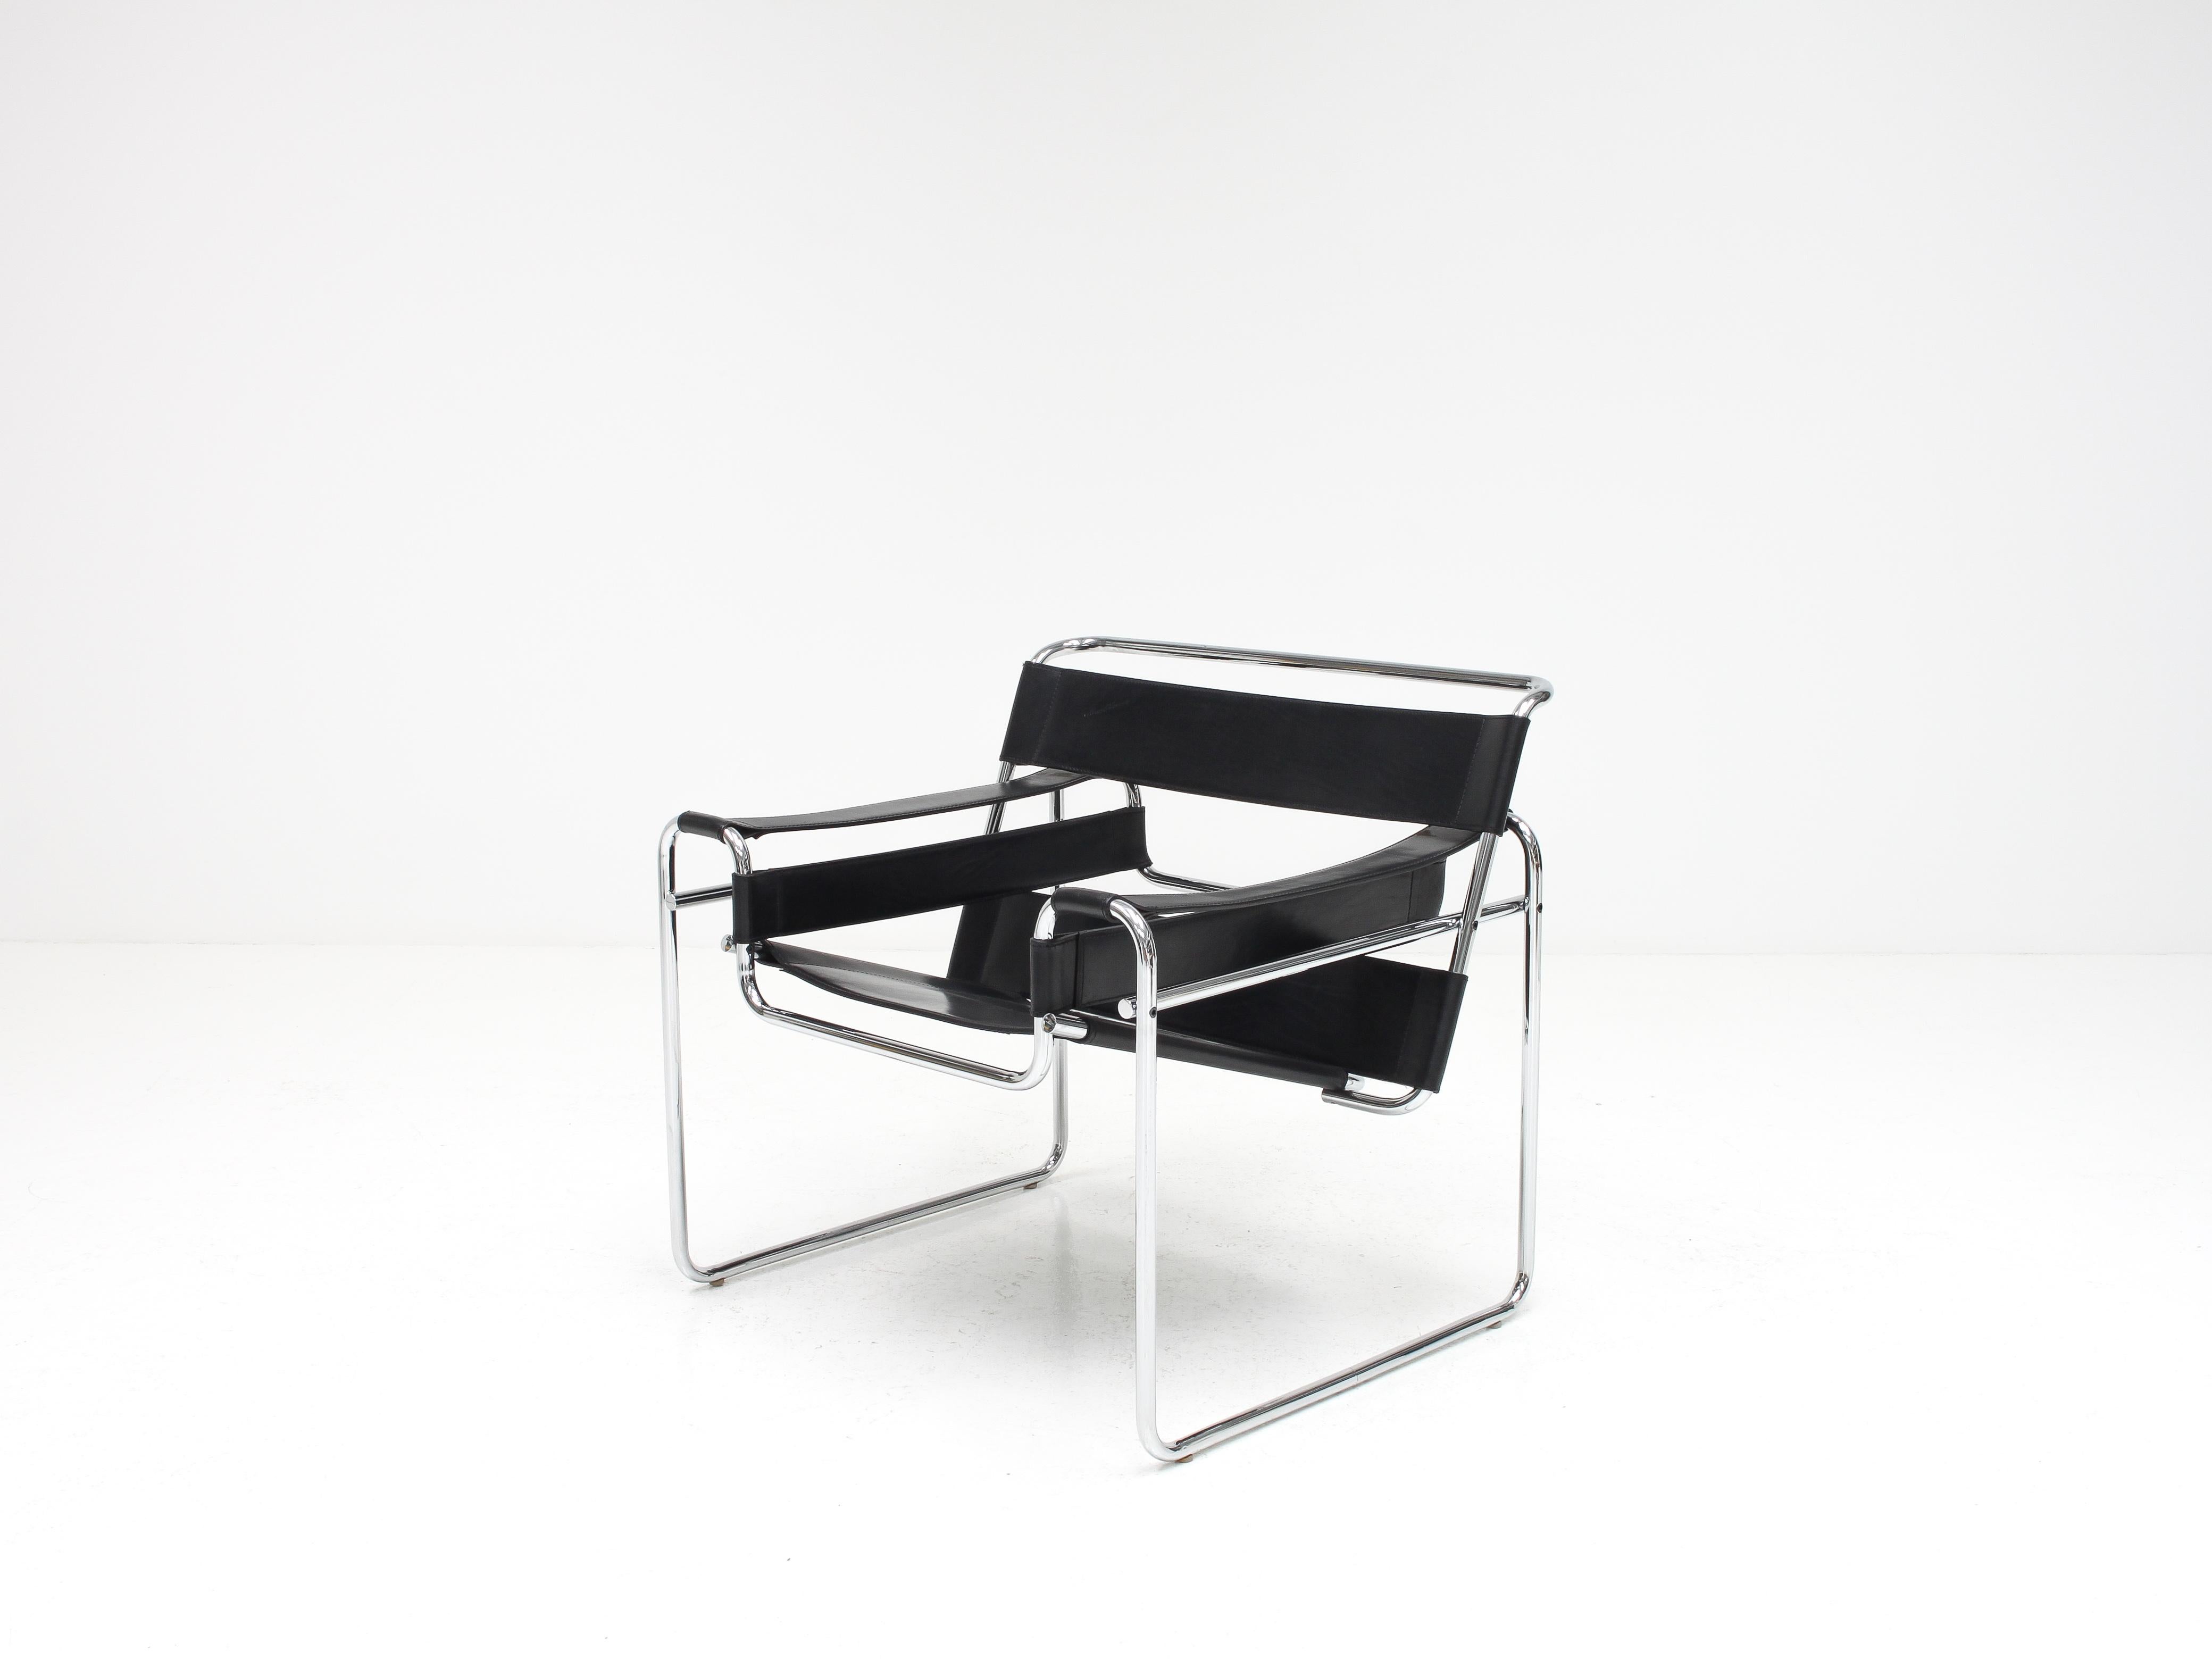 A fine Marcel Breuer 'Wassily' chair, produced before 1968 in Italy by Gavina. Authentic and stamped.

In 1968 Gavina was sold to the American company Knoll and the Bologna brand ceased to trade meaning this is a hard to find item.

The piece is in